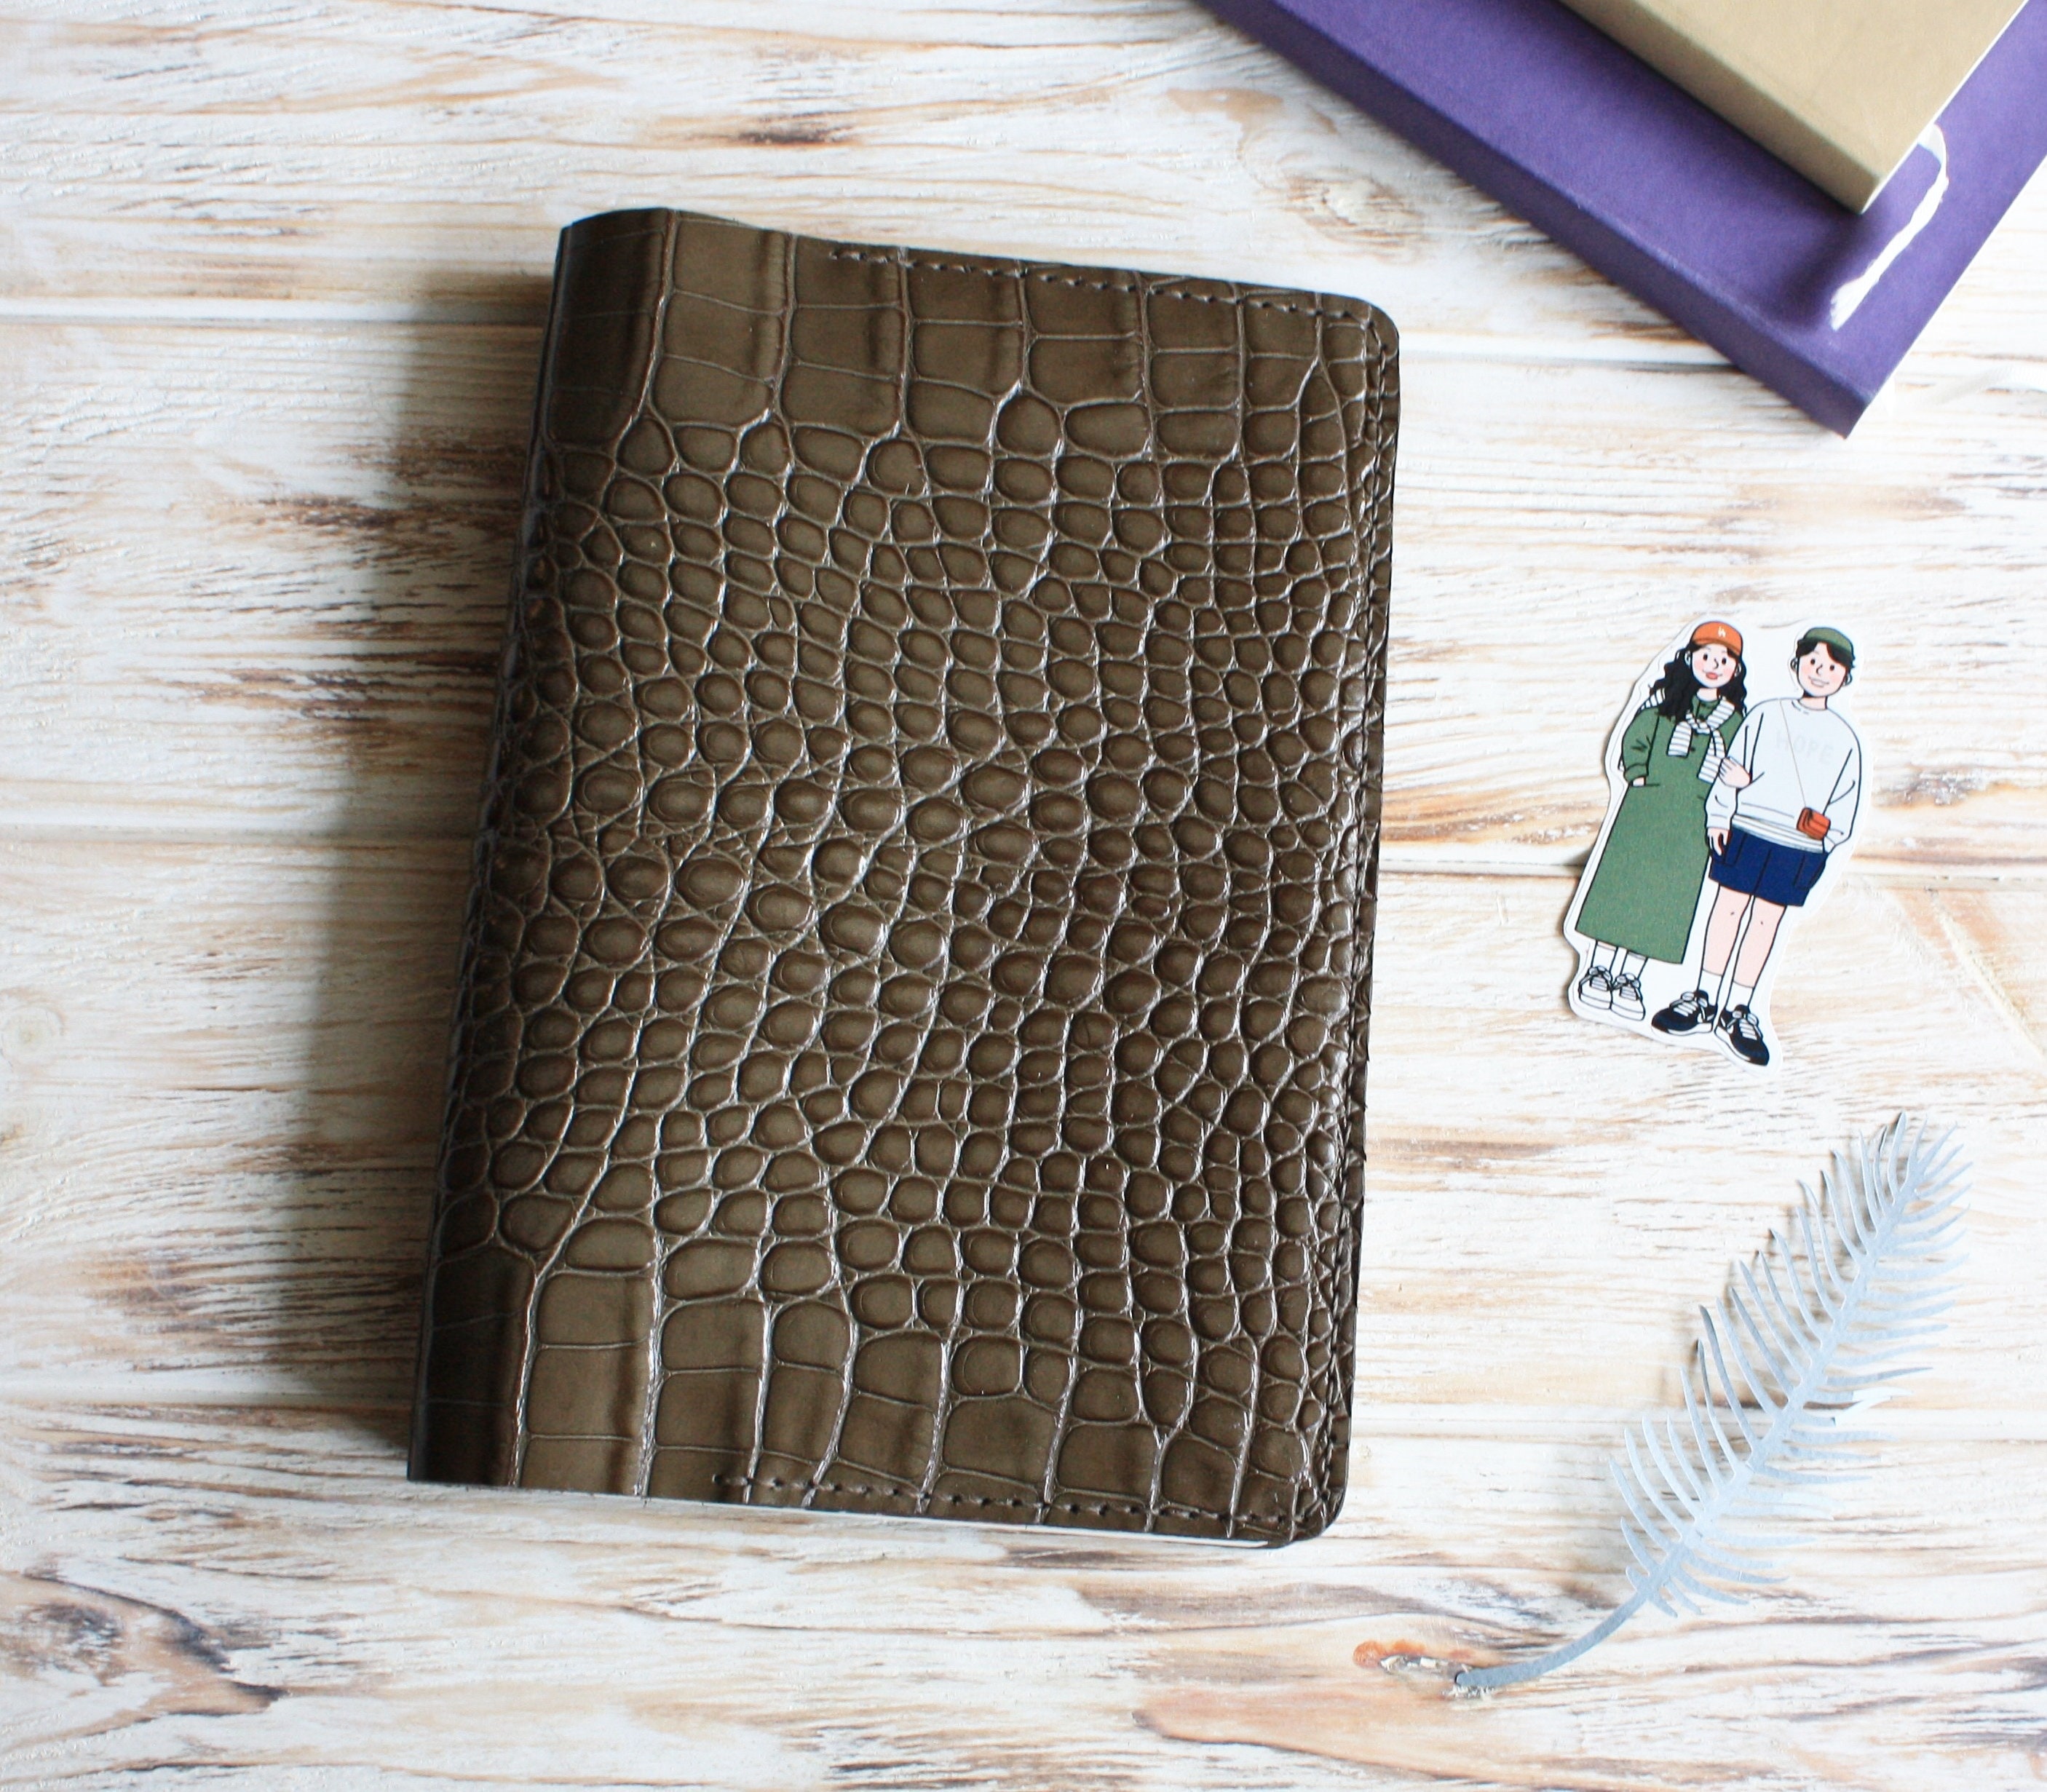 Natural Hobonichi Weeks Leather Cover with Interlocking Pen Loops